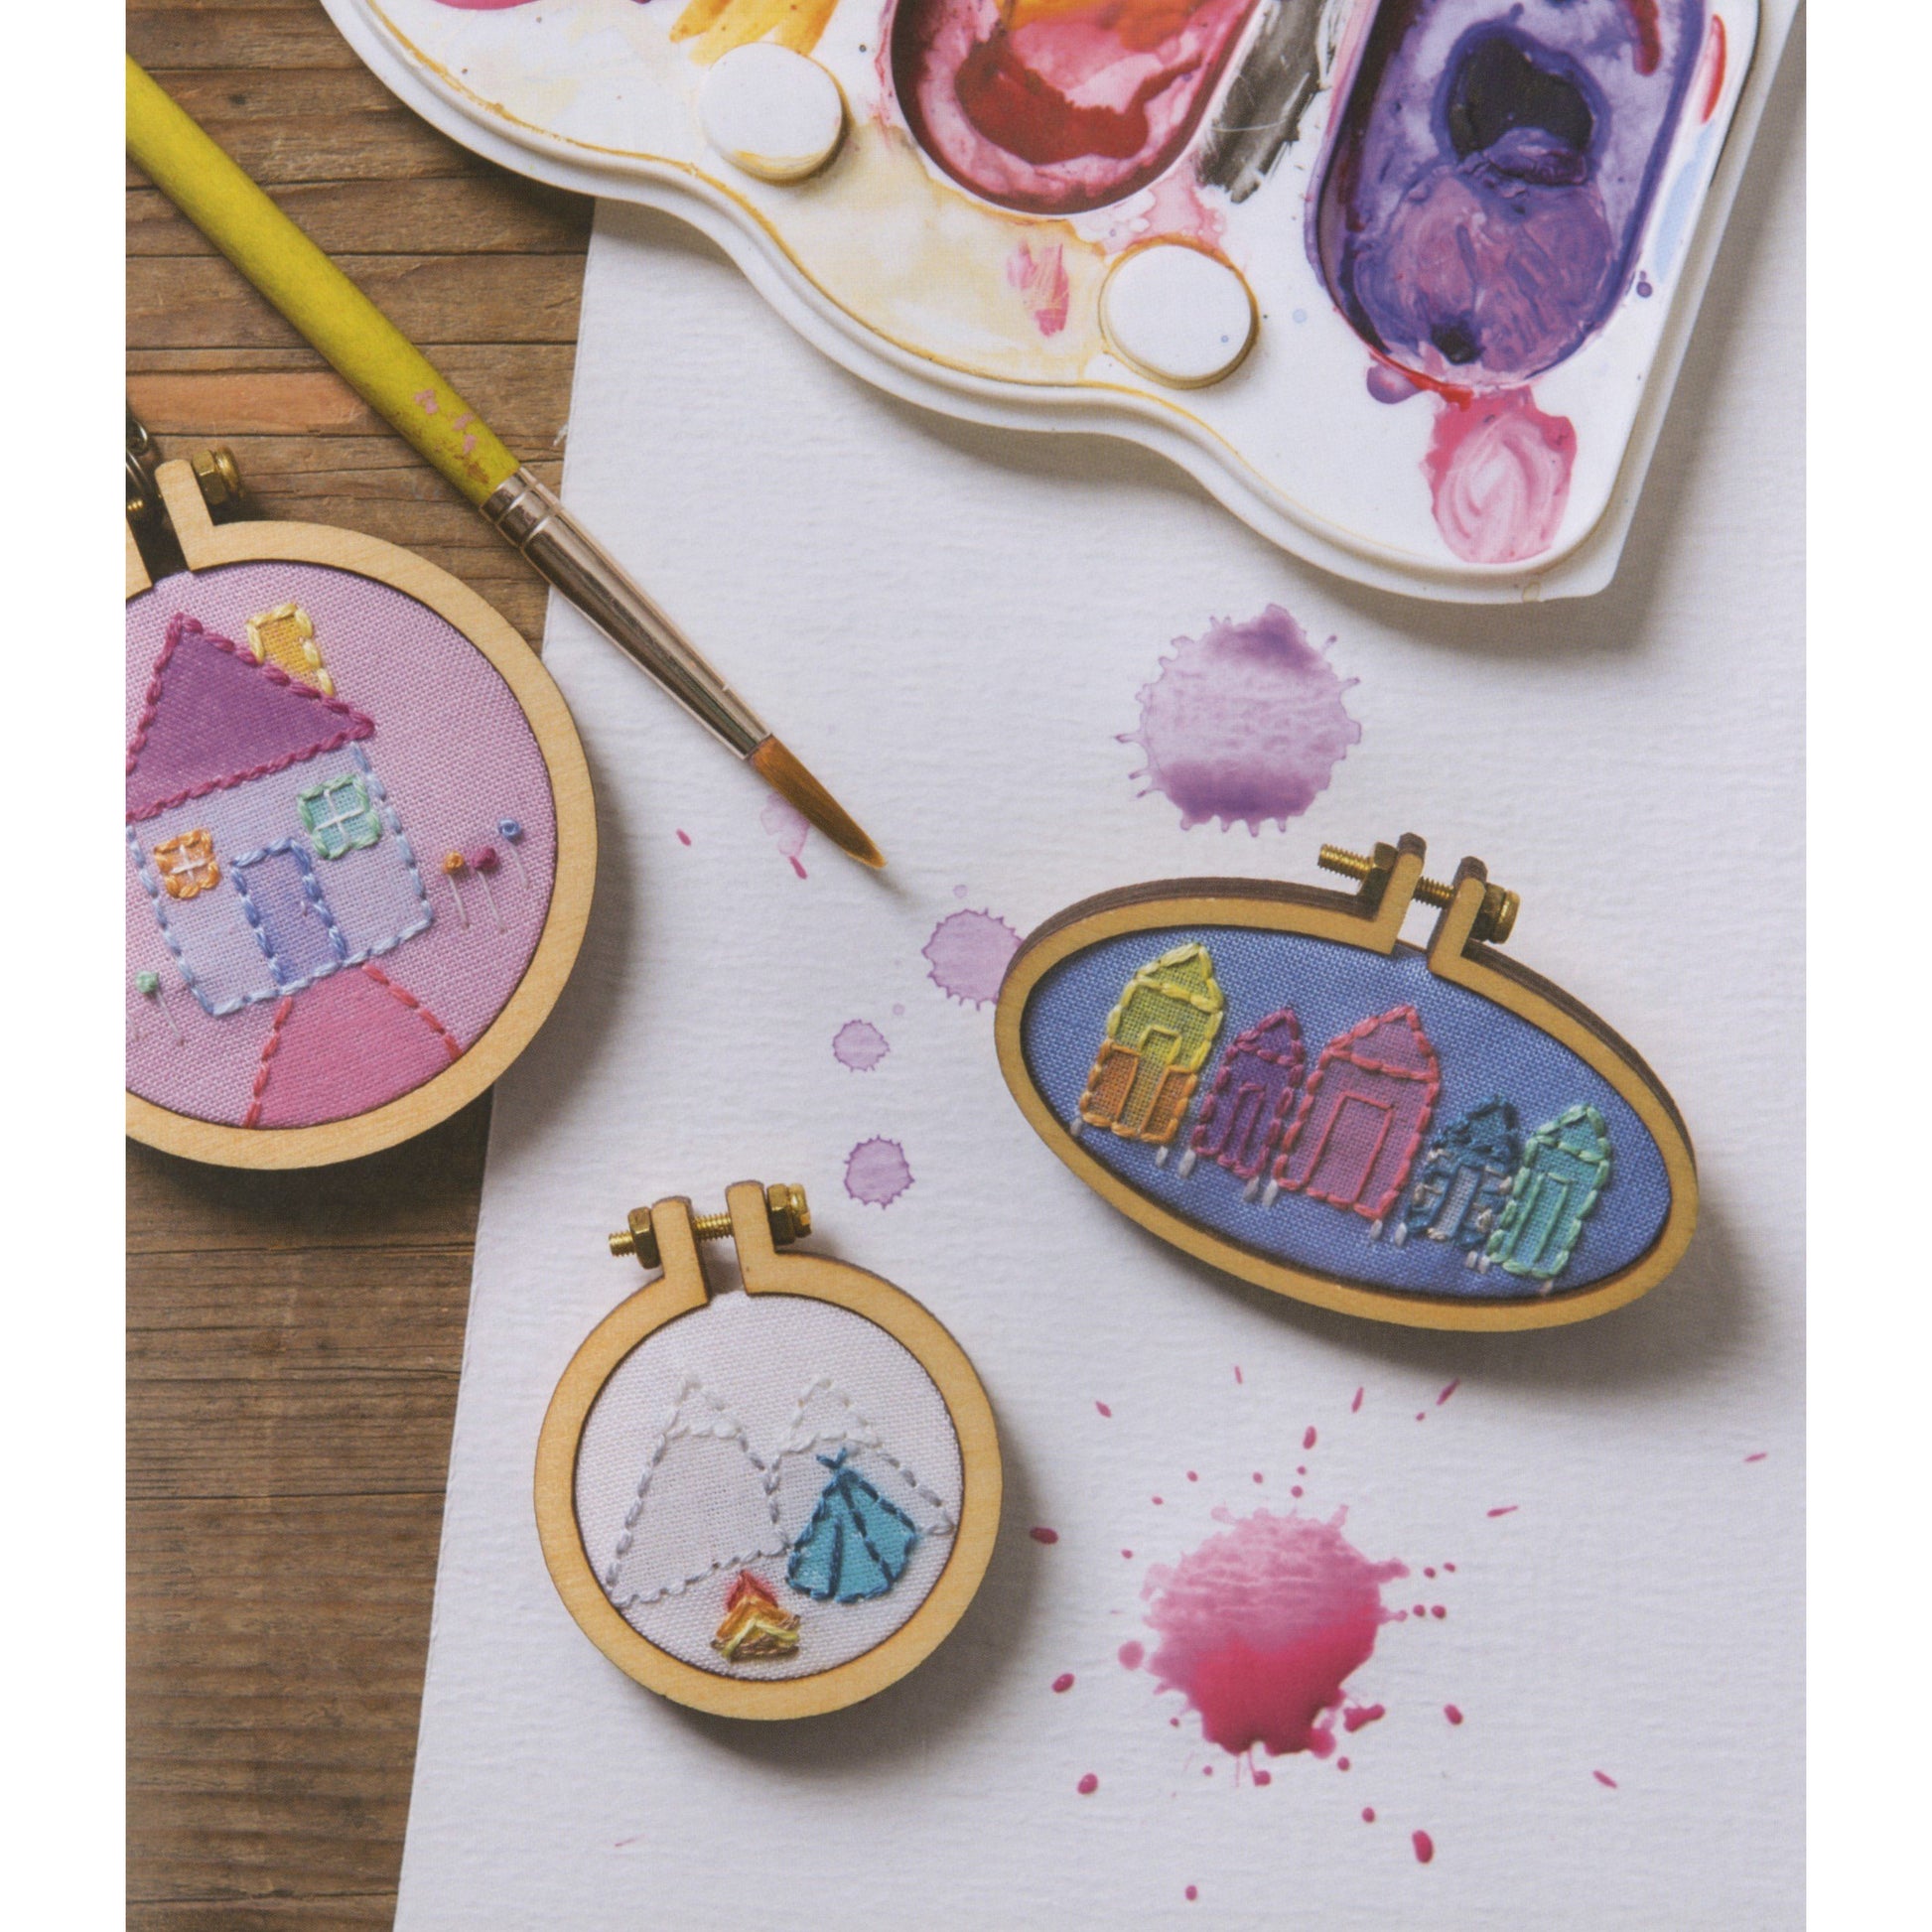 Beaded Embroidery Stitching [Book]